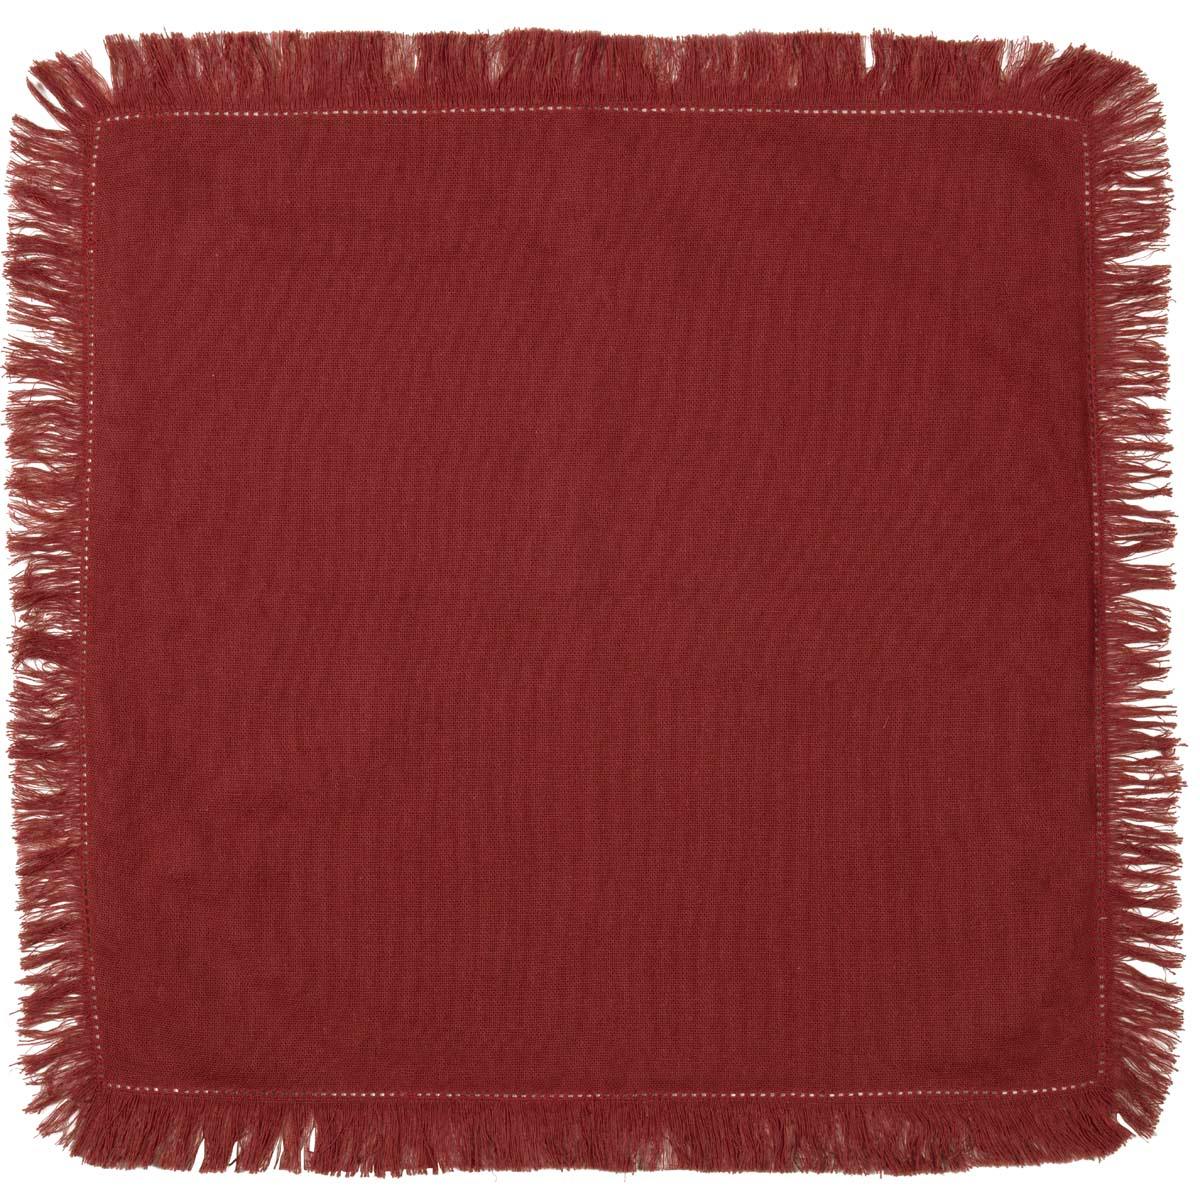 Haven Red Napkin Set of 6 VHC Brands - The Fox Decor